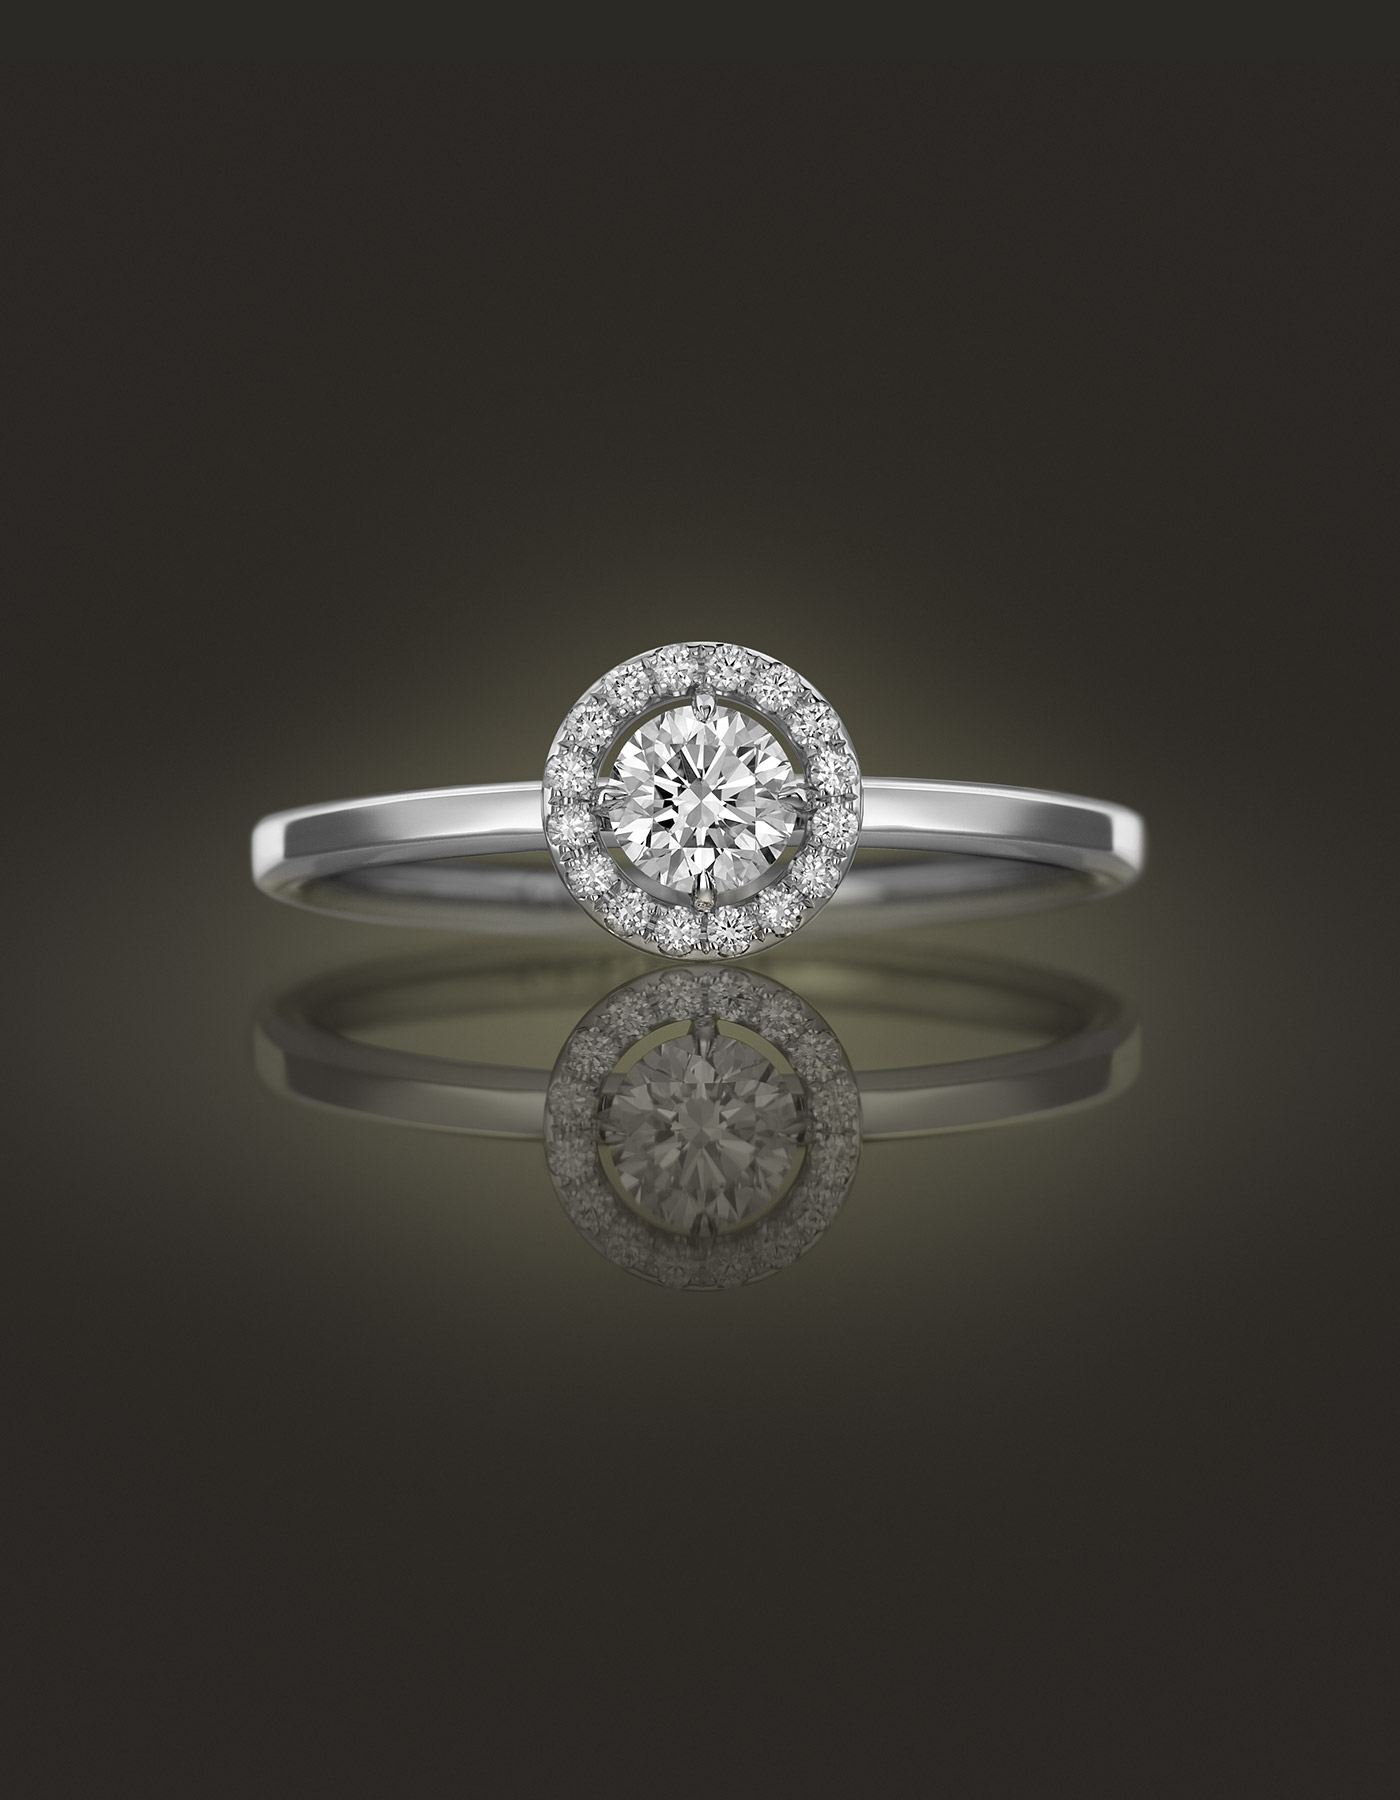 Guinnot Anonymous Halo diamond ring in 18k white gold